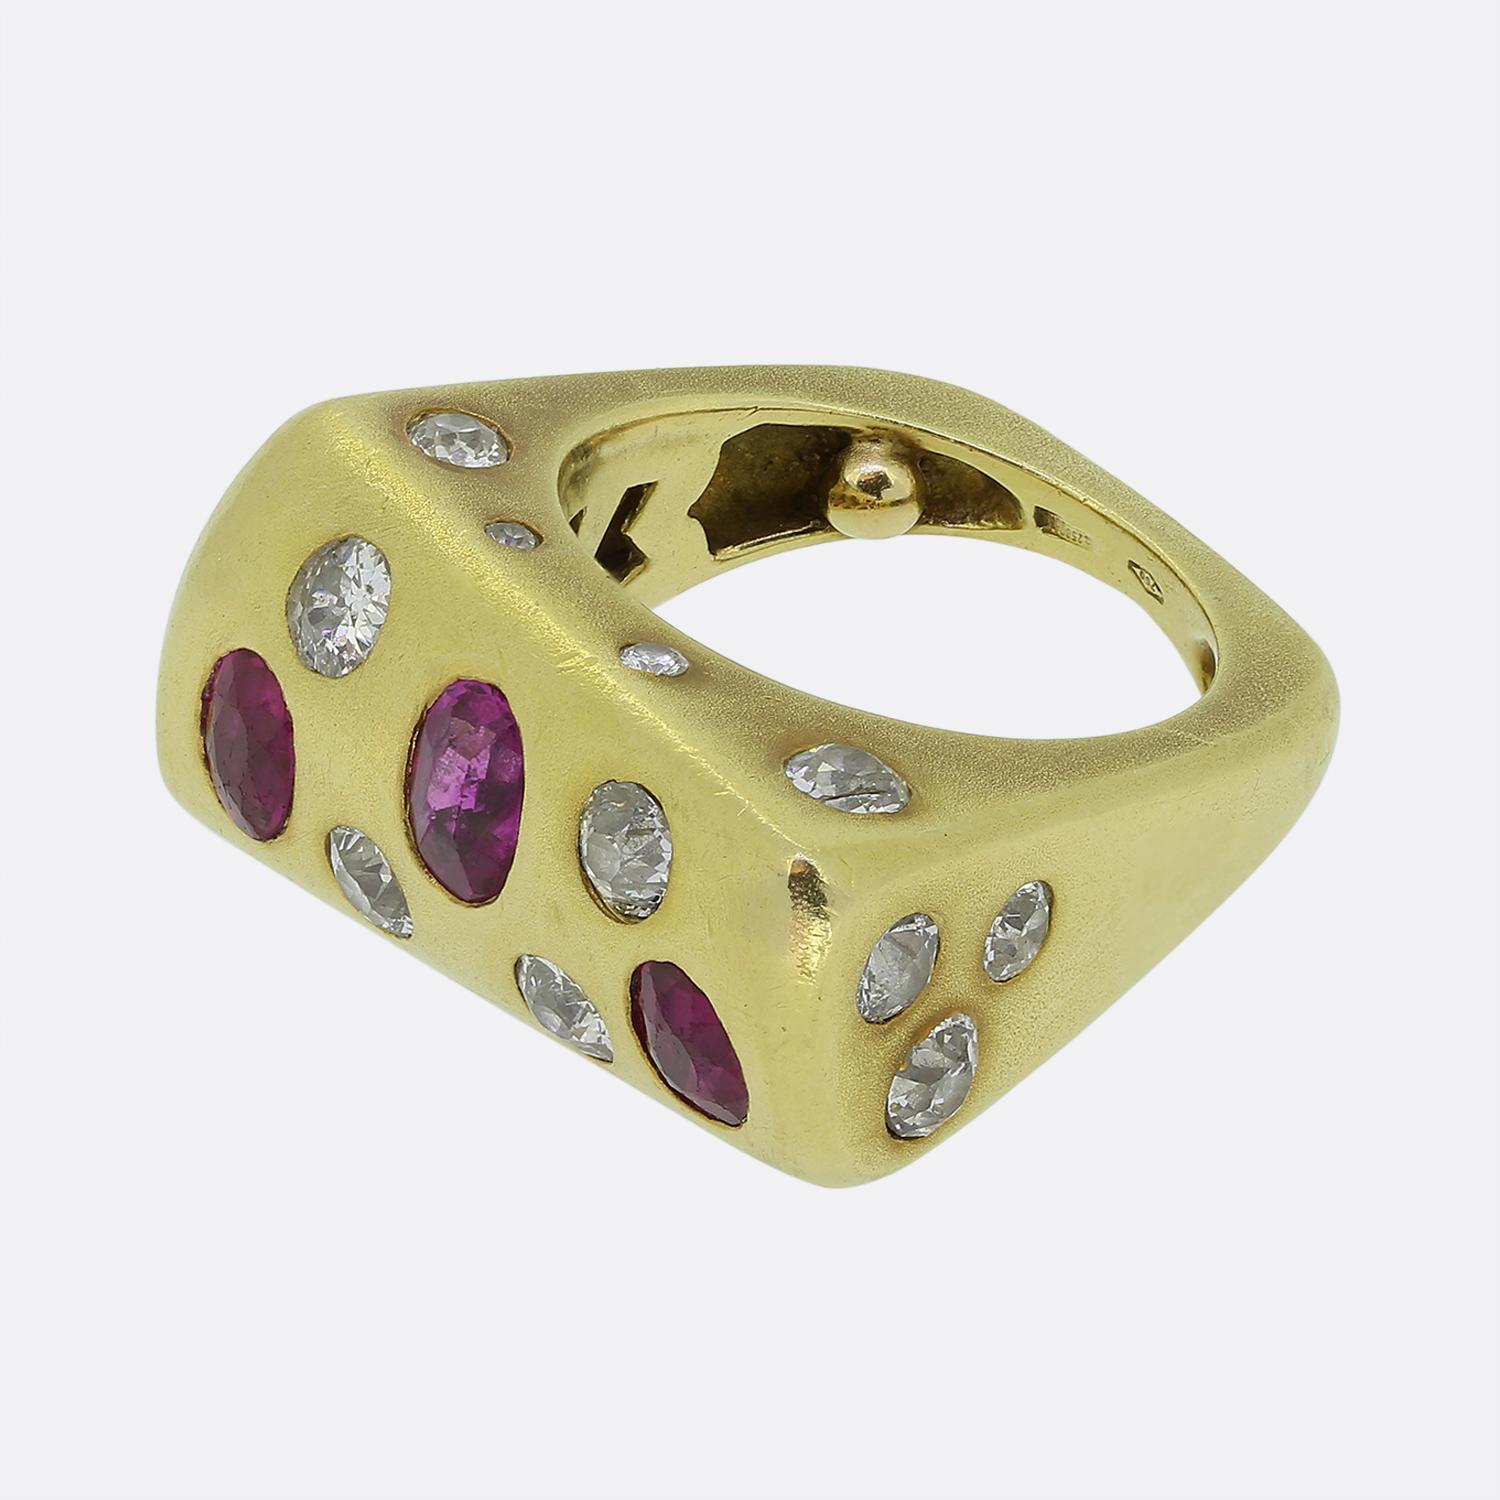 Here we have a wonderful and fun abstract ring that dates back to the 1970s. The ring has been exceptionally crafted in 18ct yellow gold and features an array of old cut diamonds and rich red Burmese rubies. The bold oblong design along with the